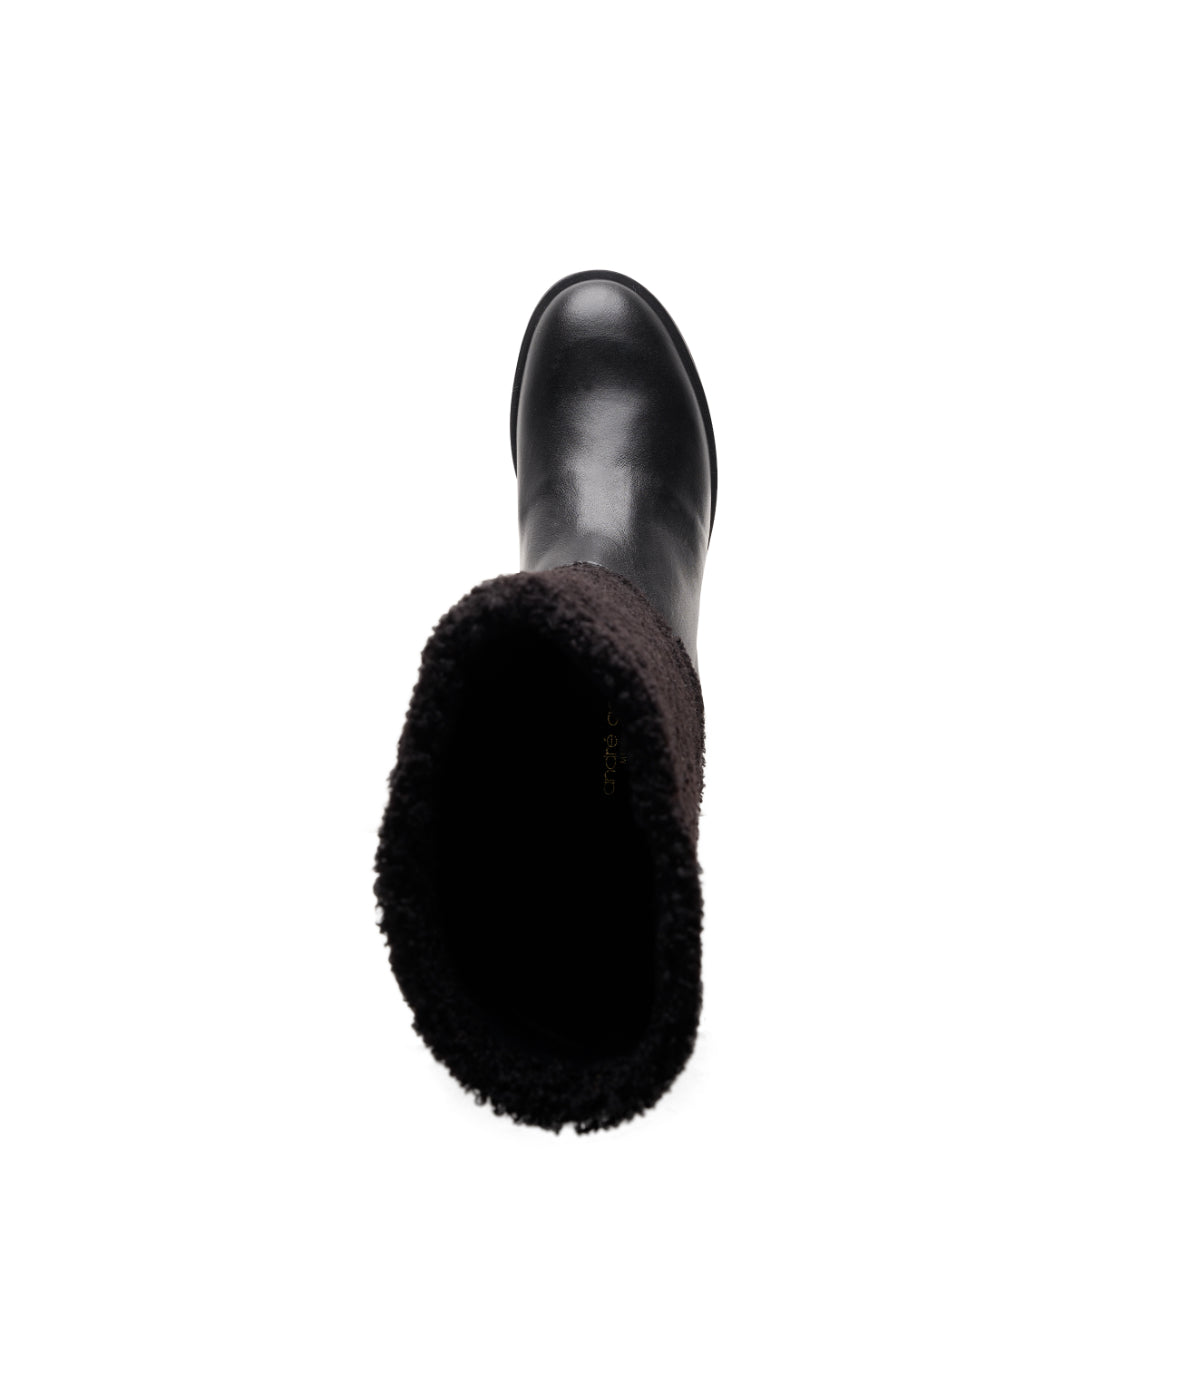 Riding Boot with Faux Shearling